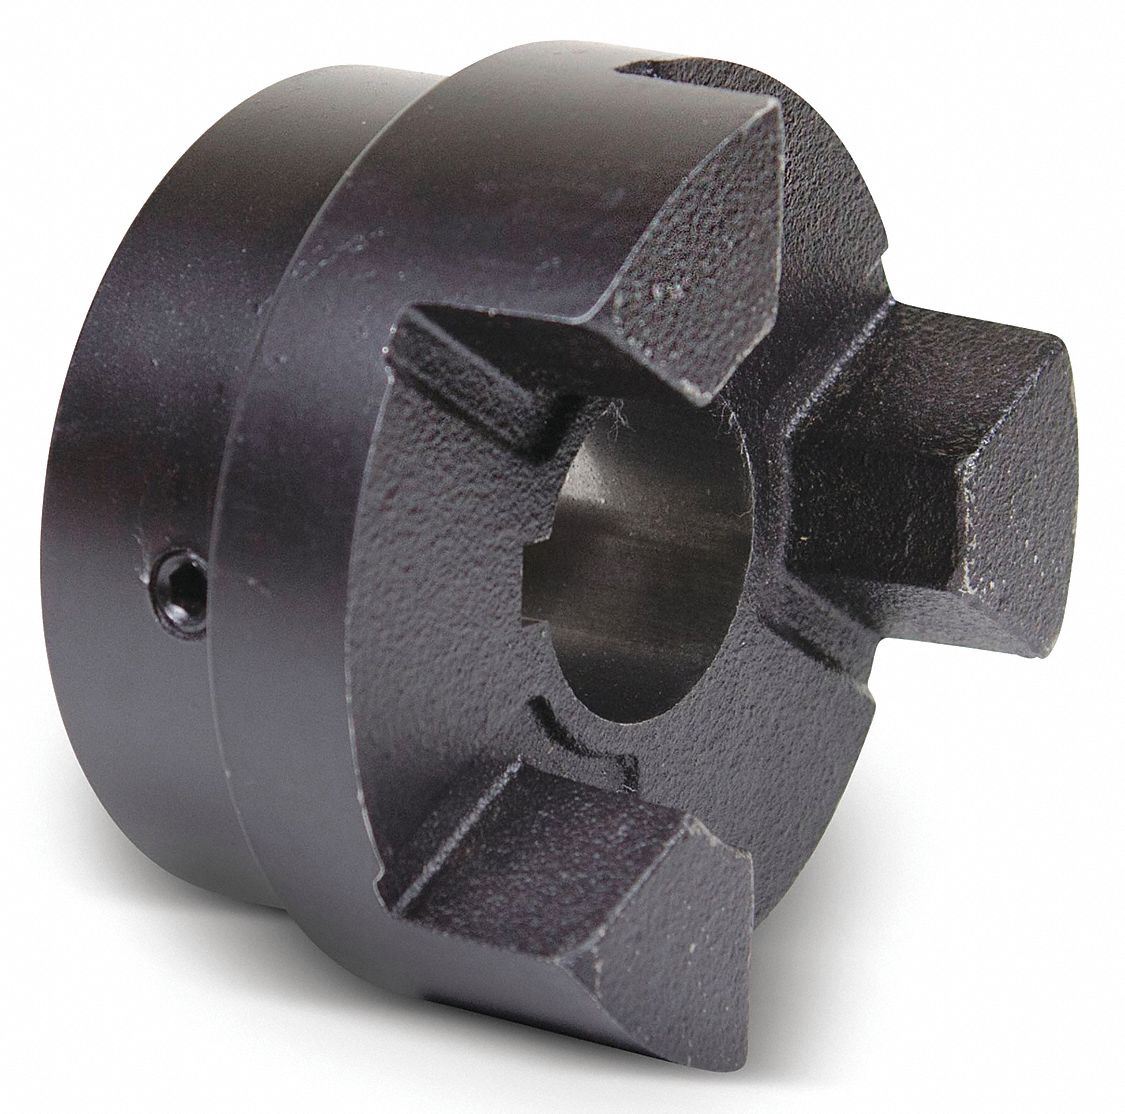 Sintered Iron 1.68 Length Through Bore Inch 3.32 OD 2268 in-lbs Max Nominal Torque Lovejoy 11743 Size L110 Standard Jaw Coupling Hub 1.25 Bore 0.25 x 0.125 Keyway 